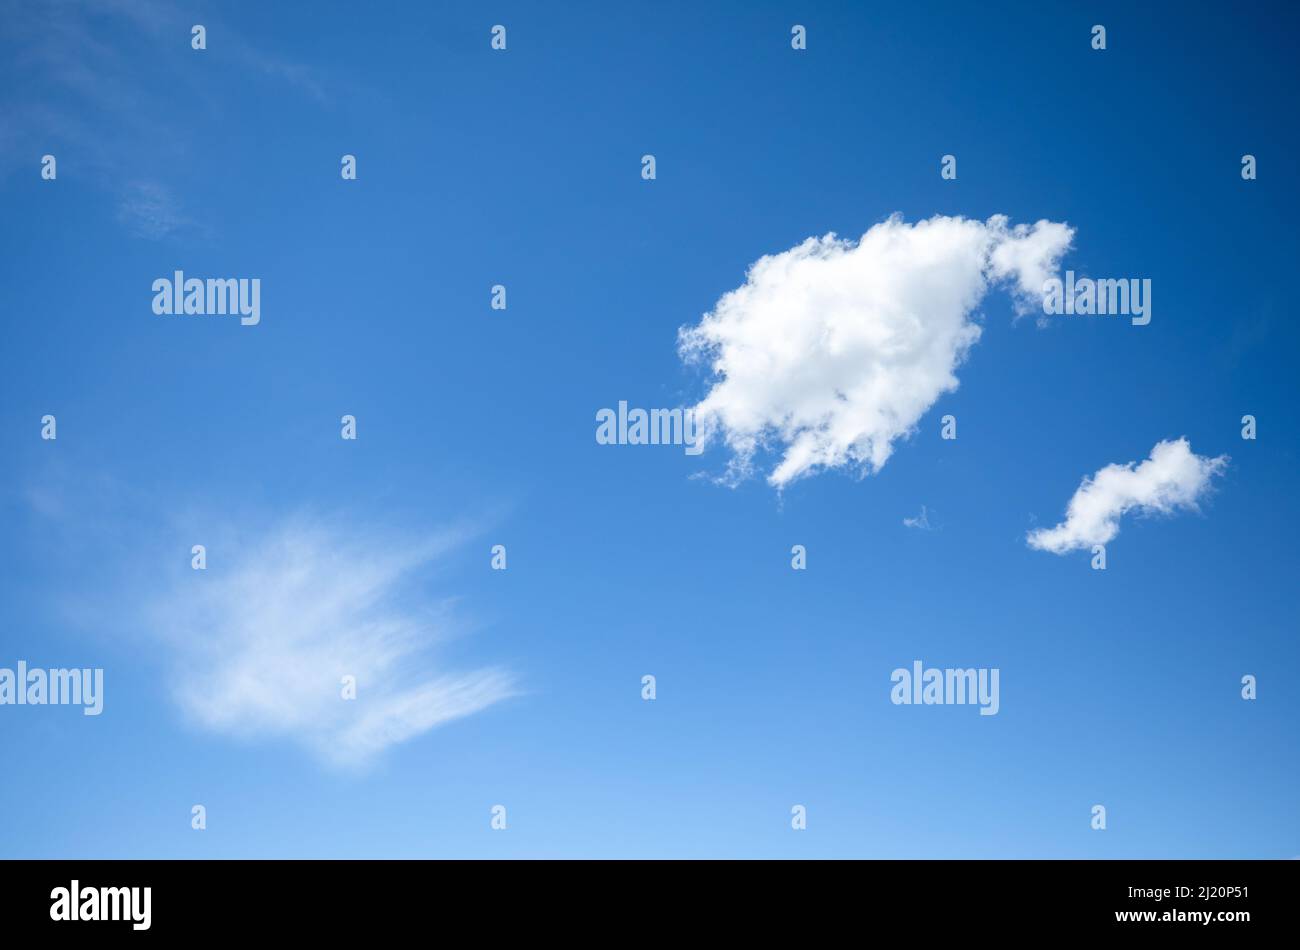 Three contrasting clouds in a bright blue sky Stock Photo